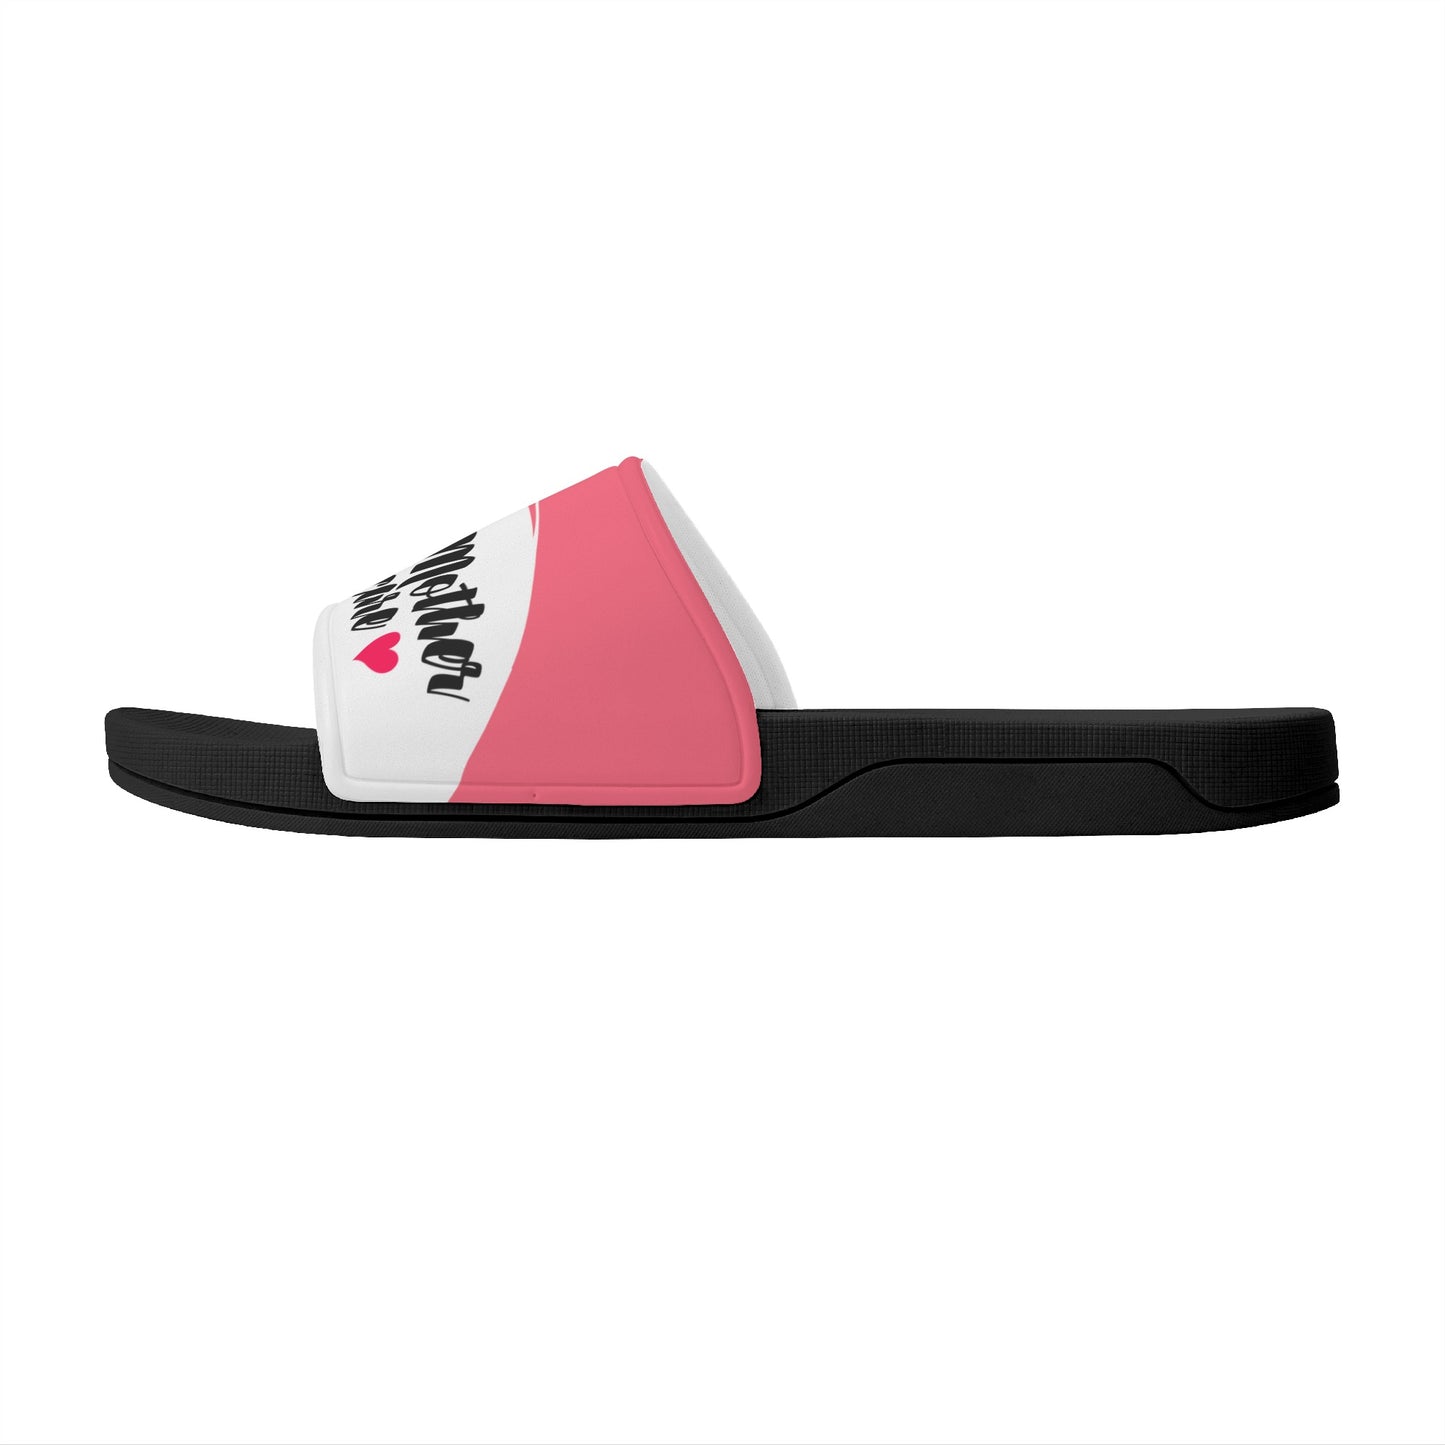 For the Comfort of a Slipper Give Mom A Gift of Love With These Womens Slide Sandals Shoes